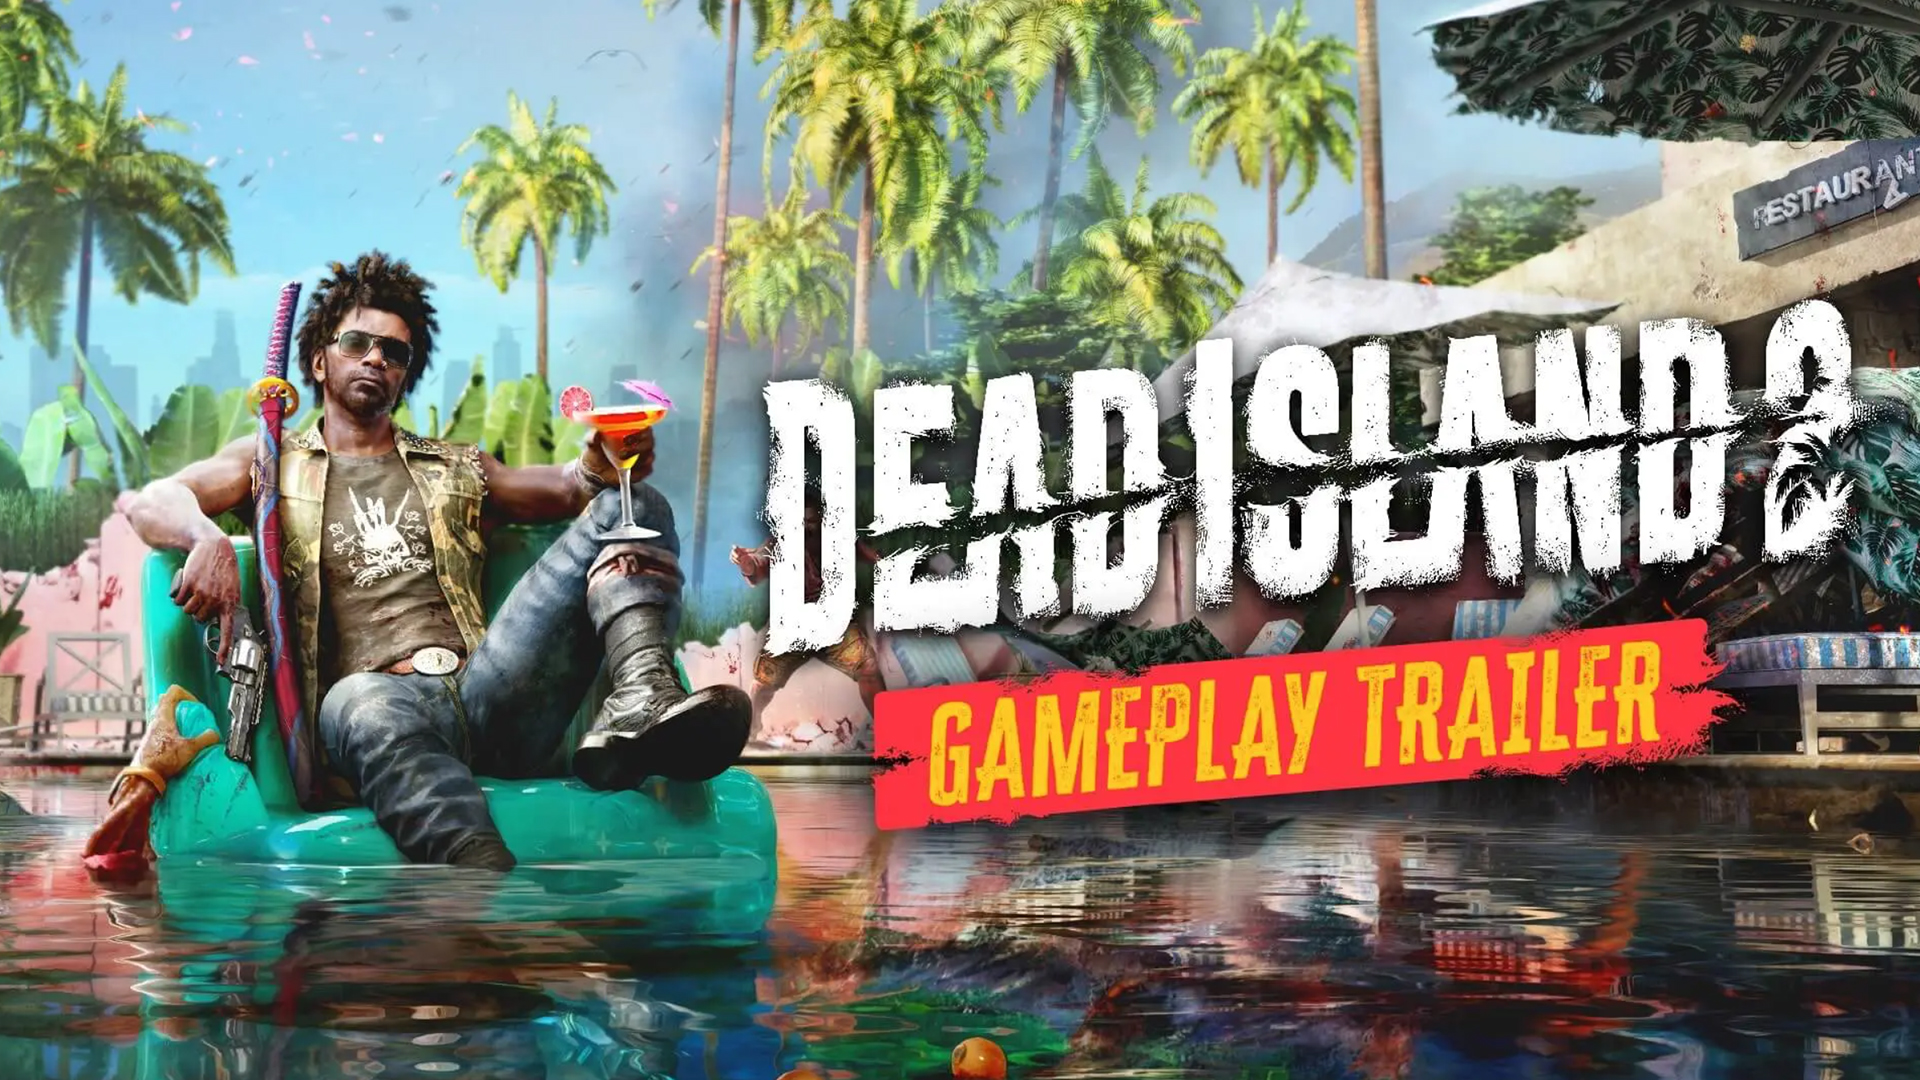 Dead Island 2 Co-Op First Impressions : r/Jaboody